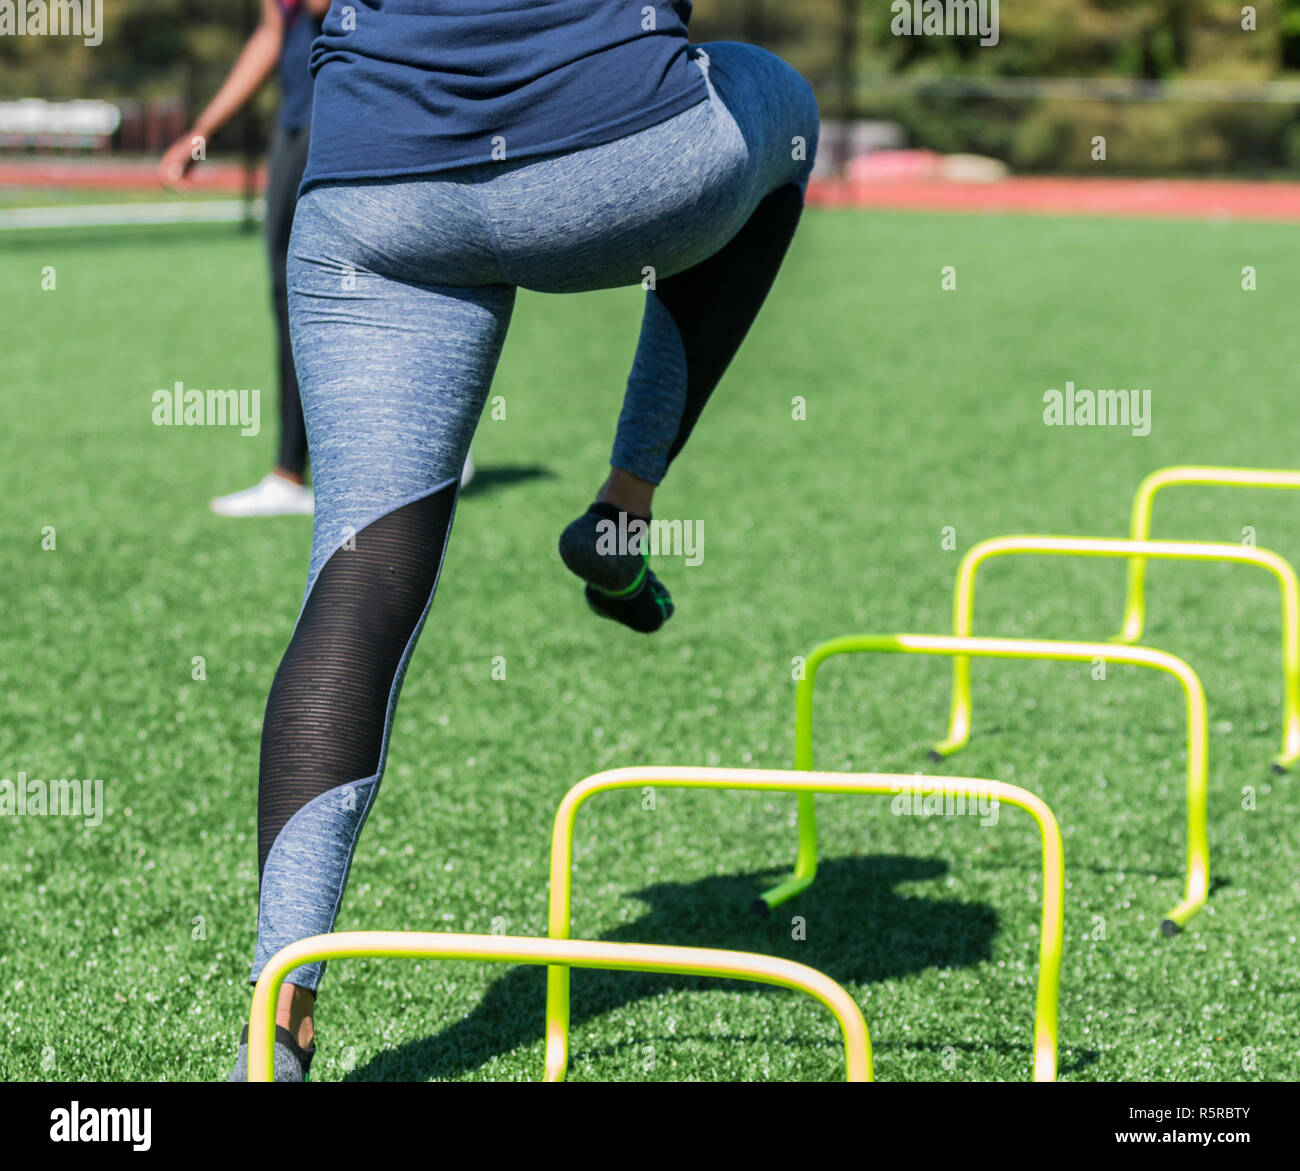 A female high school athlete performs running drills over yellow mini banana hurdles on a turf field with no shoes on, only socks in blue spandex. Stock Photo